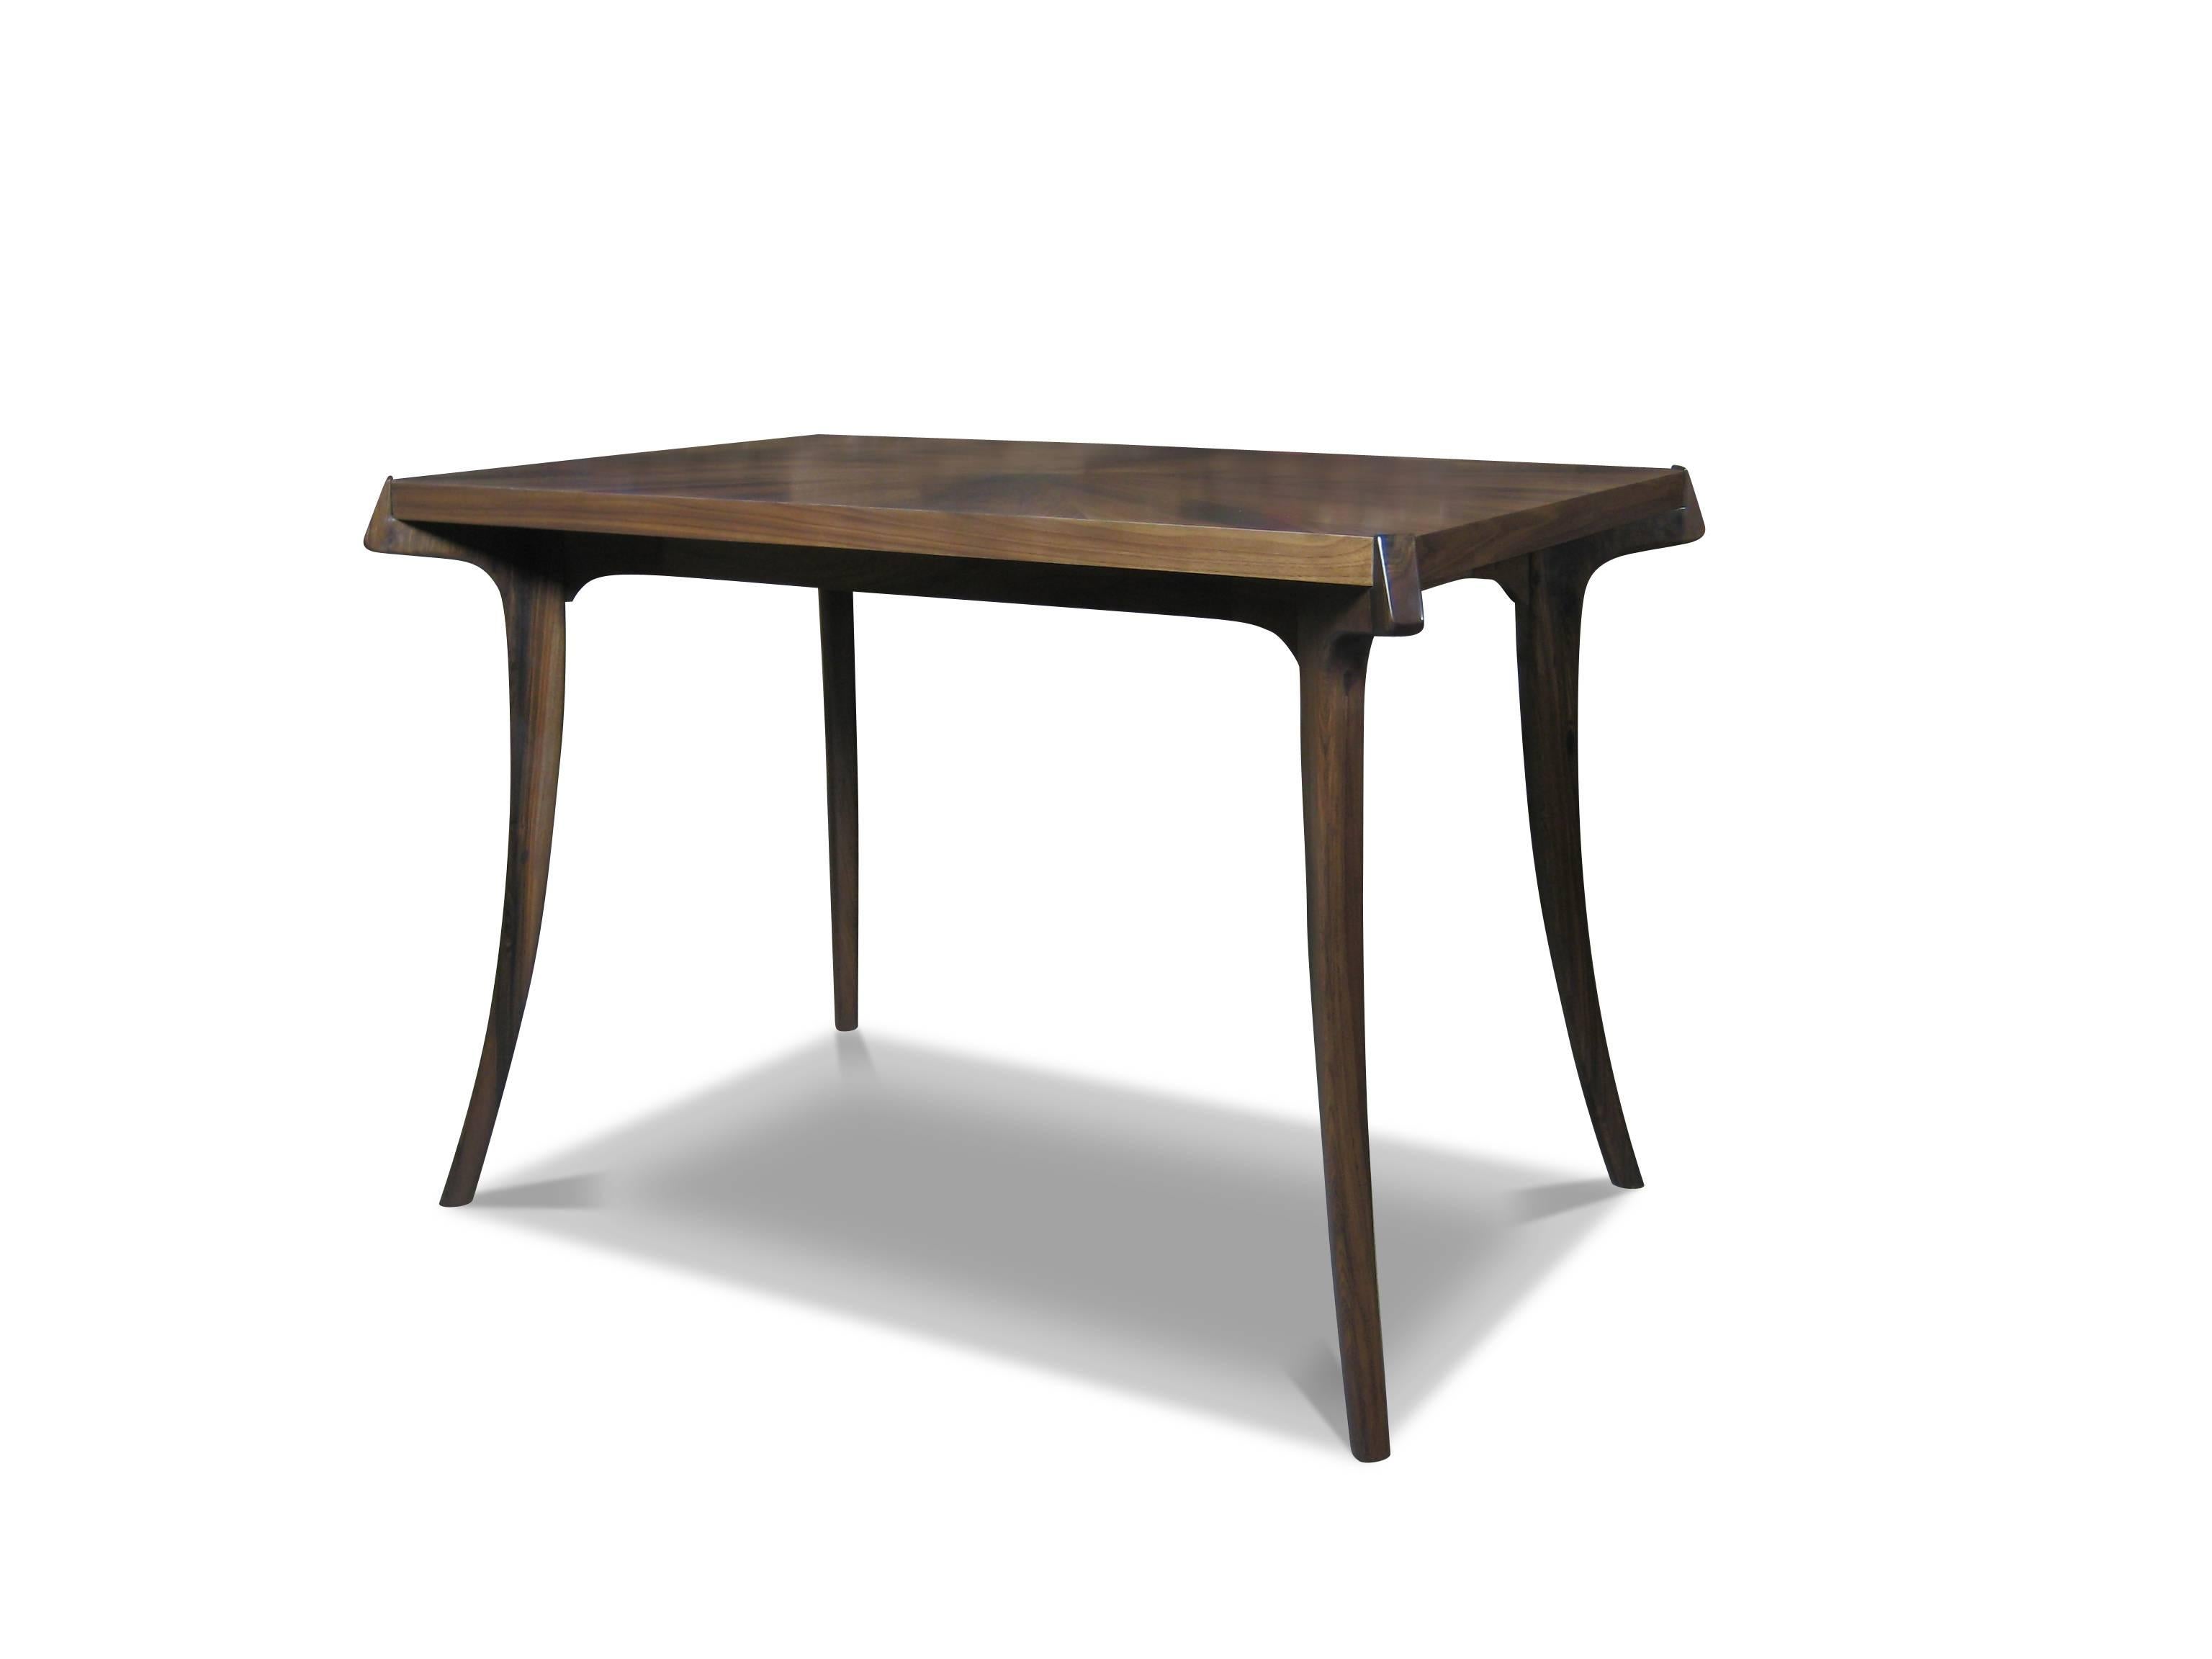 The Uccello Writing Desk is handcrafted one by one in Costantini's workshop in Buenos Aires. The surface of the table can be specified in any species of wood, or color, or really anything you can imagine. The sabre-legs give a nod to the form of the